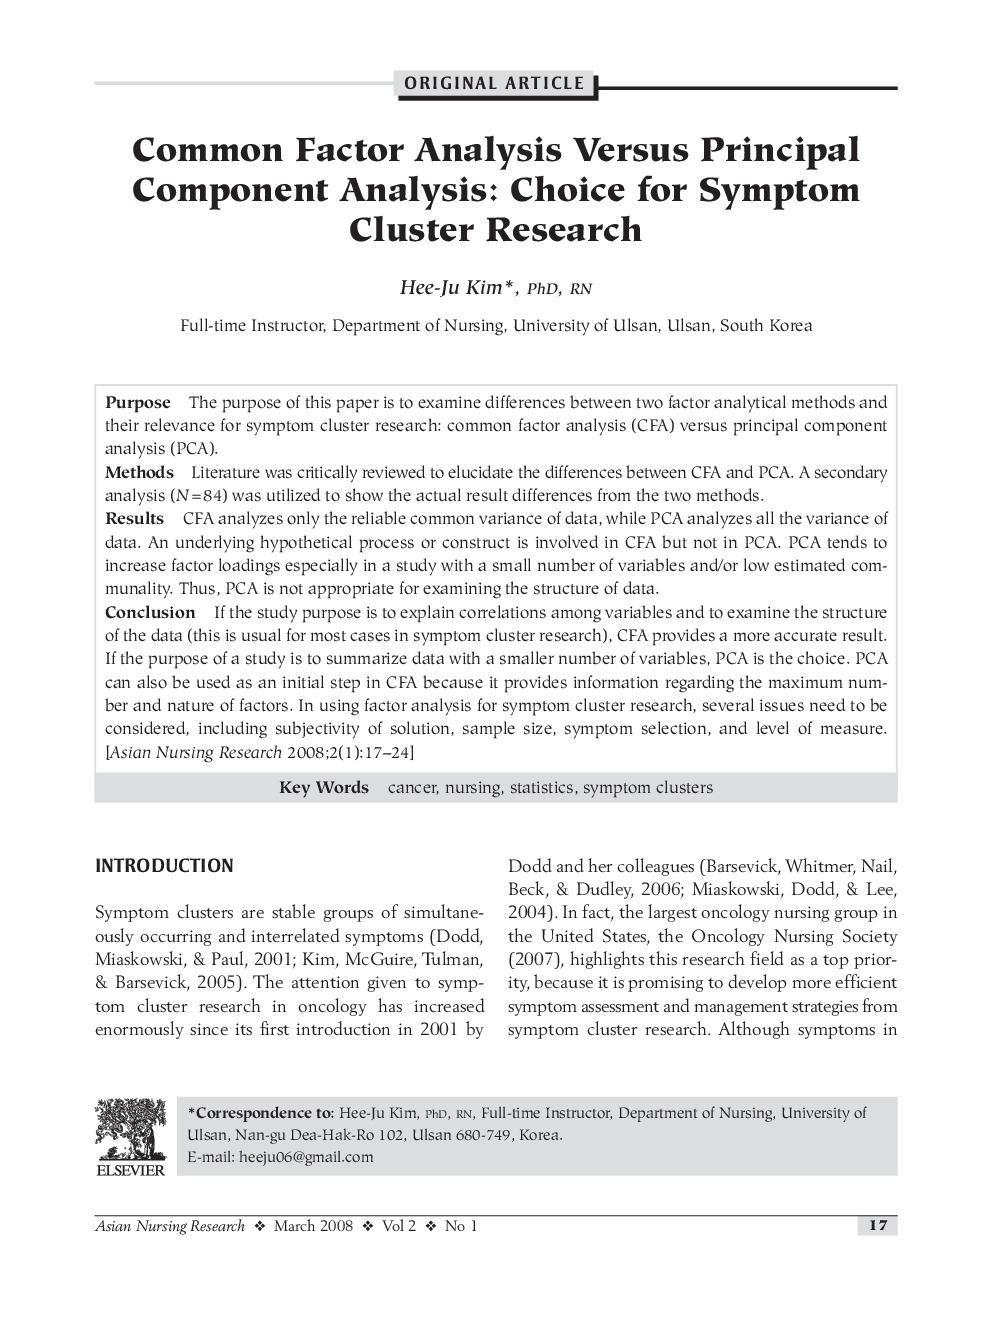 Common Factor Analysis Versus Principal Component Analysis: Choice for Symptom Cluster Research